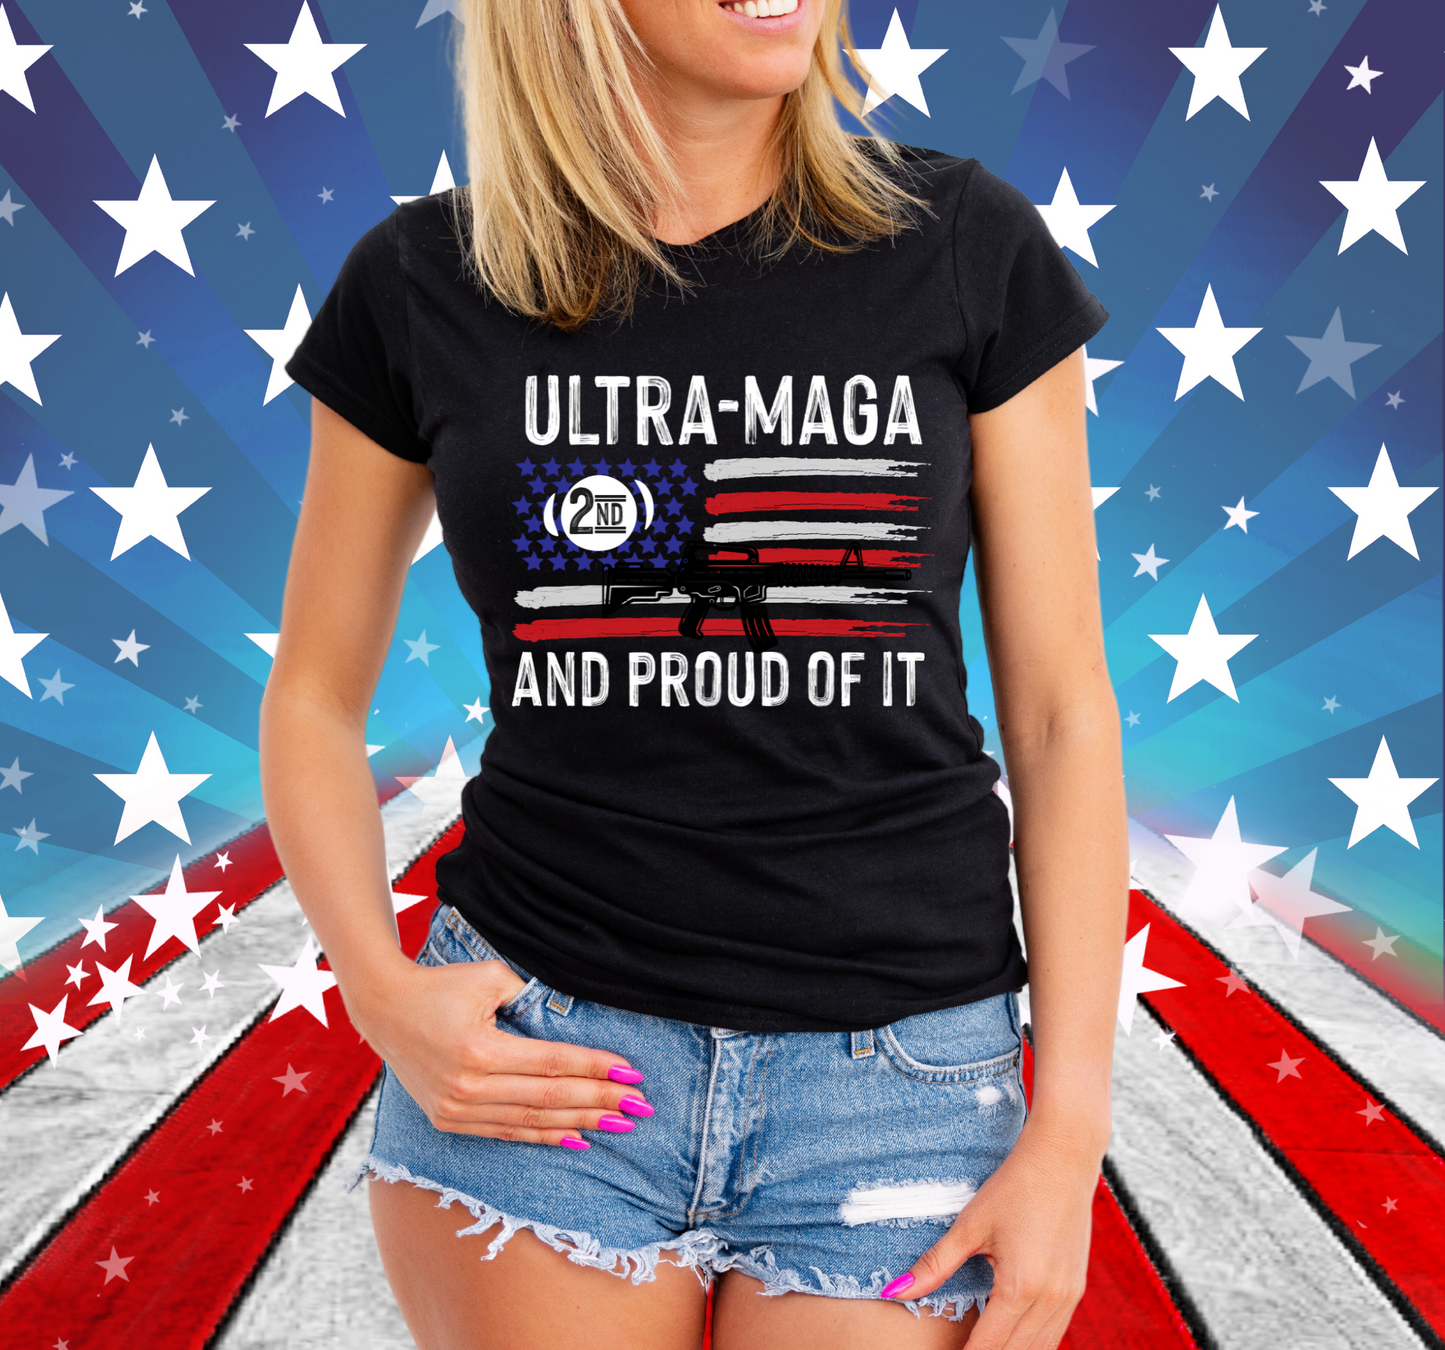 ULTRA-MAGA AND PROUD OF IT